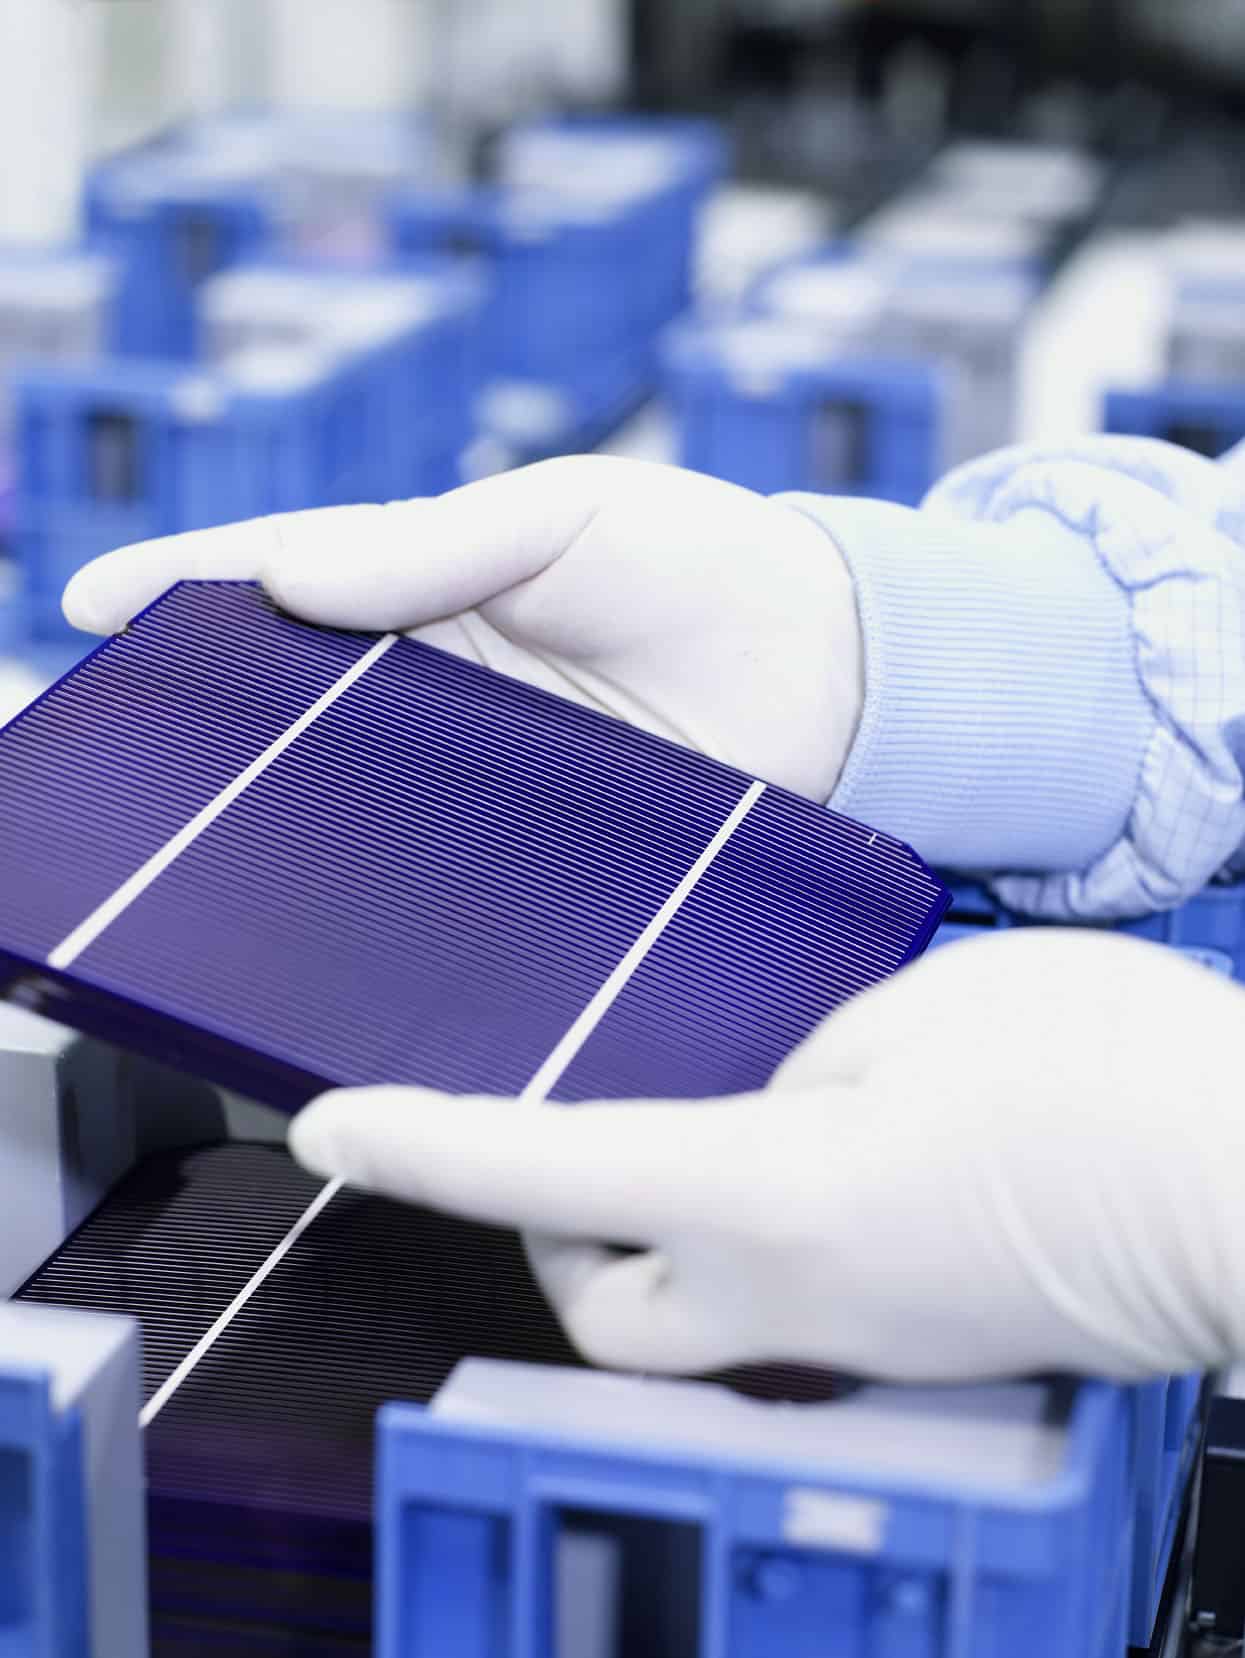 Location for a Solar Panel Manufacturing Business